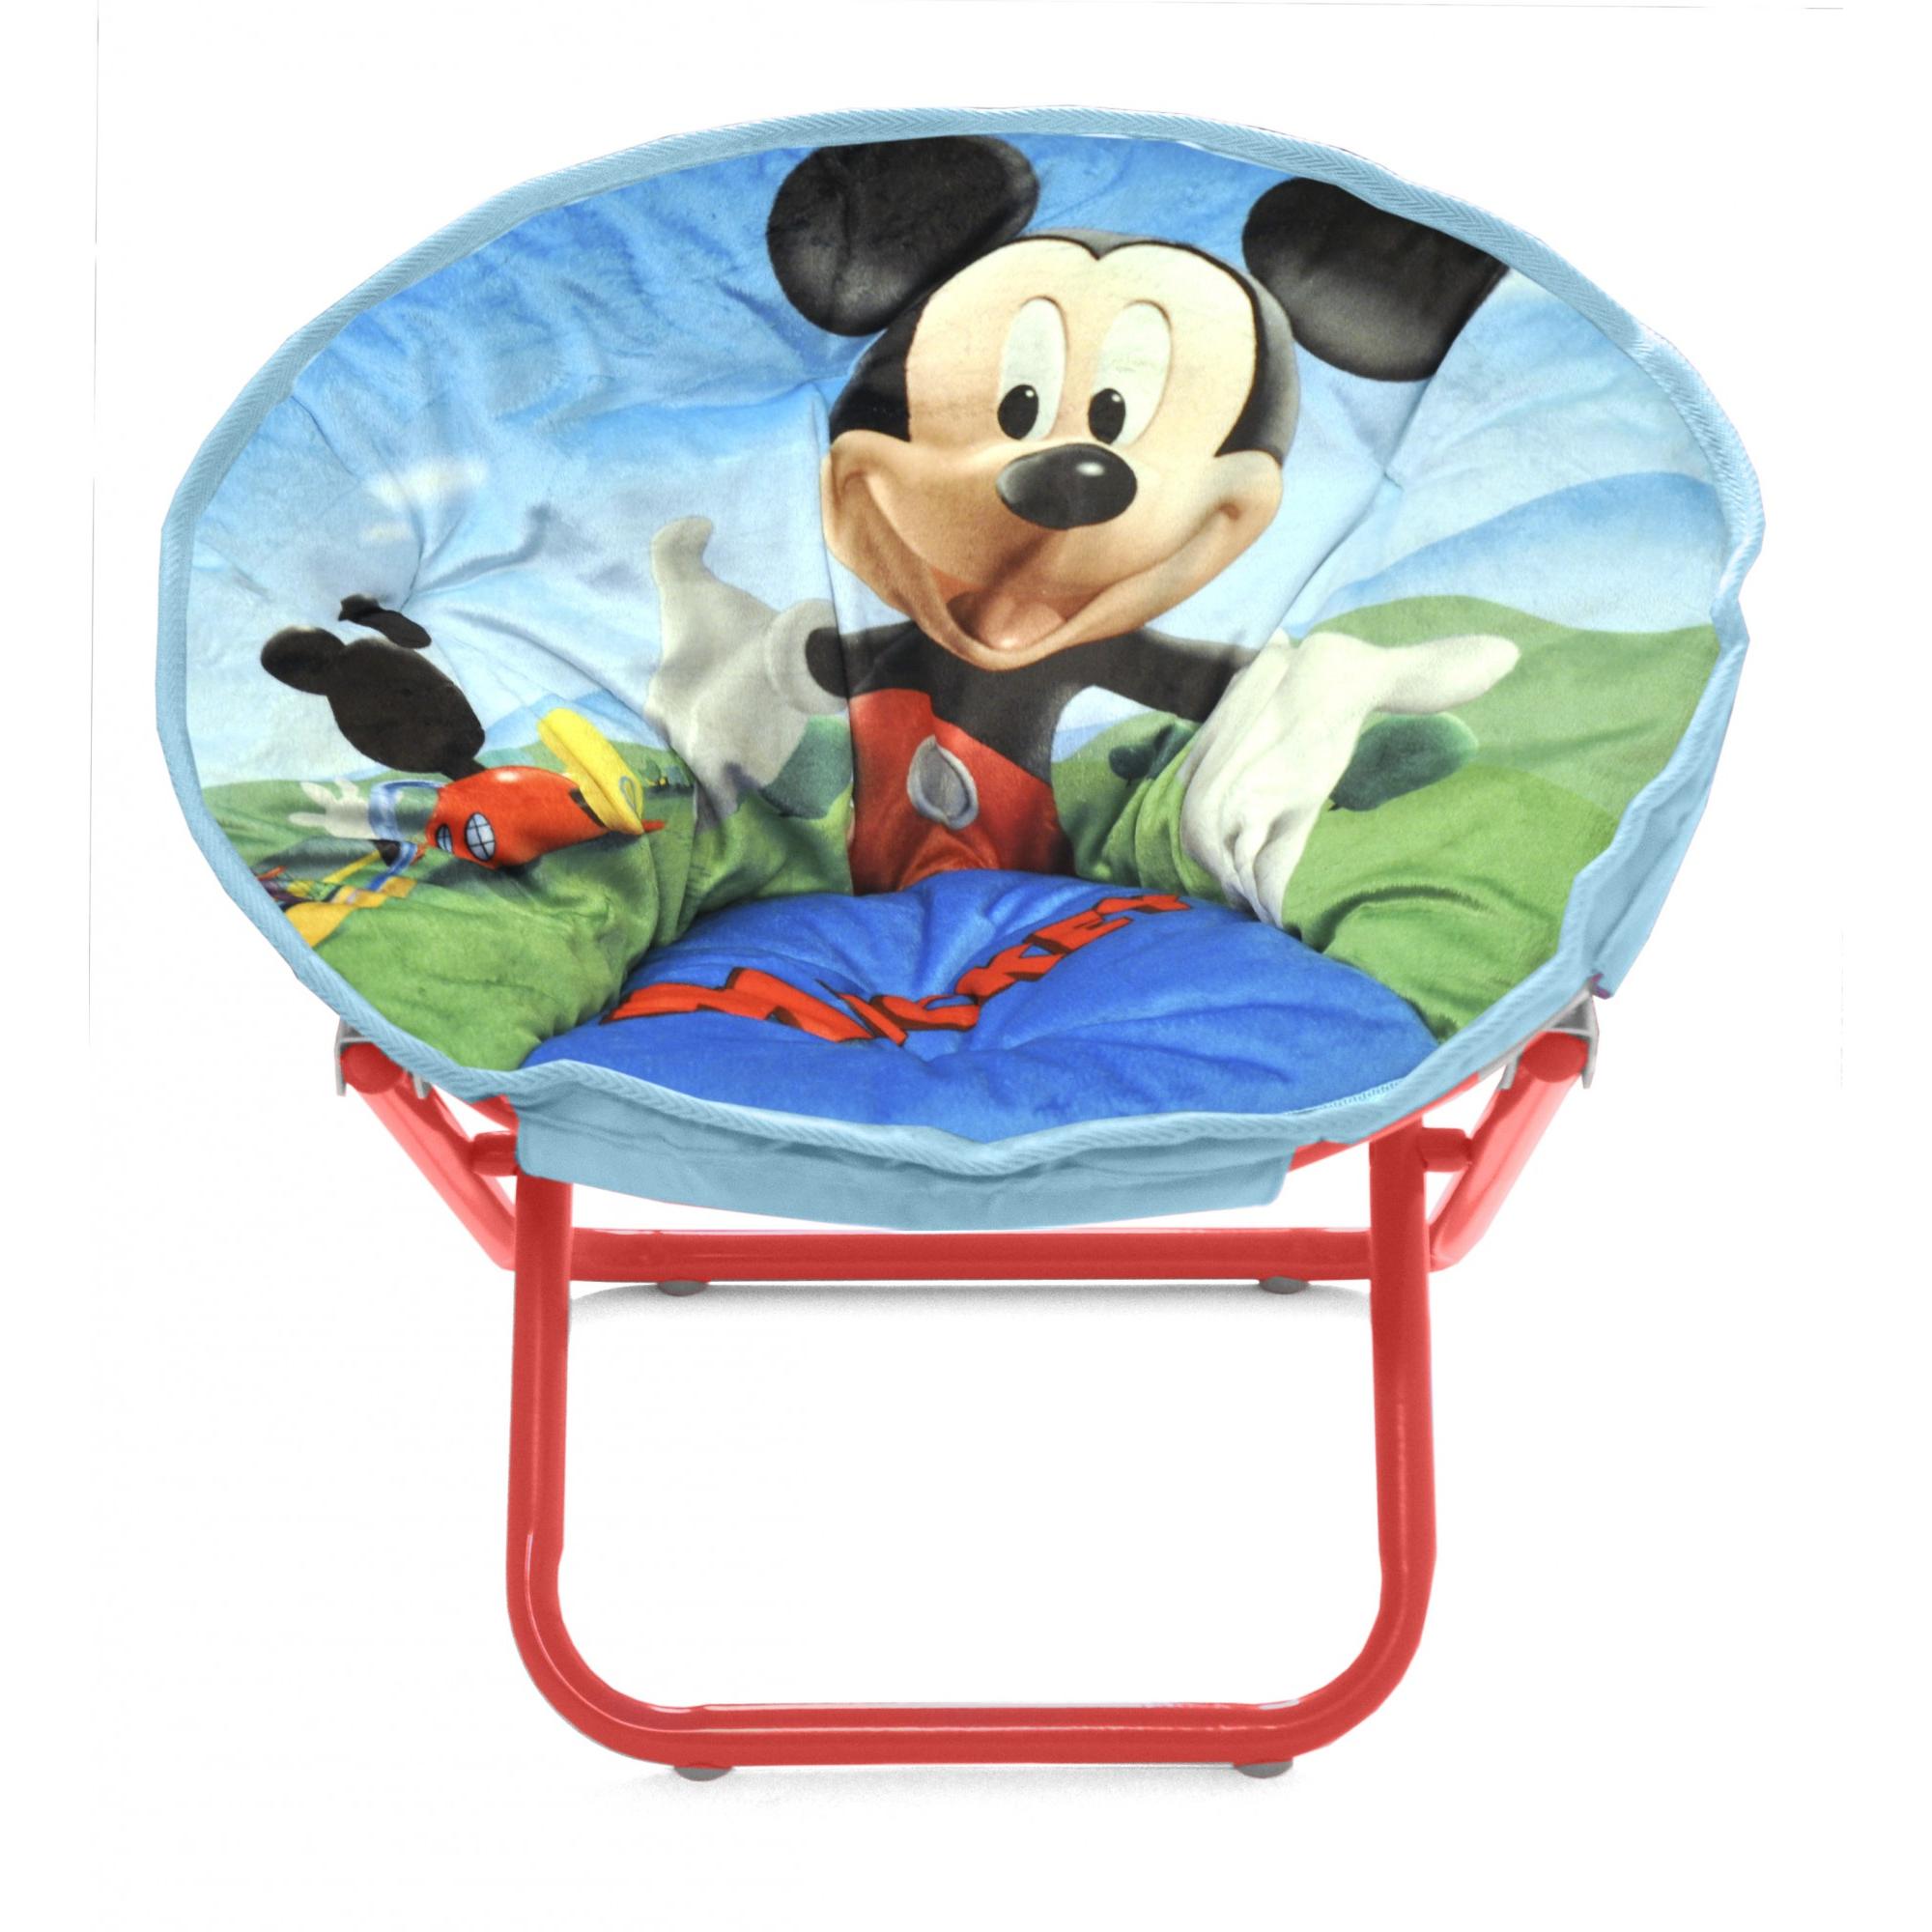 Disney Polyester Folding Chair, Multi-color - image 1 of 4